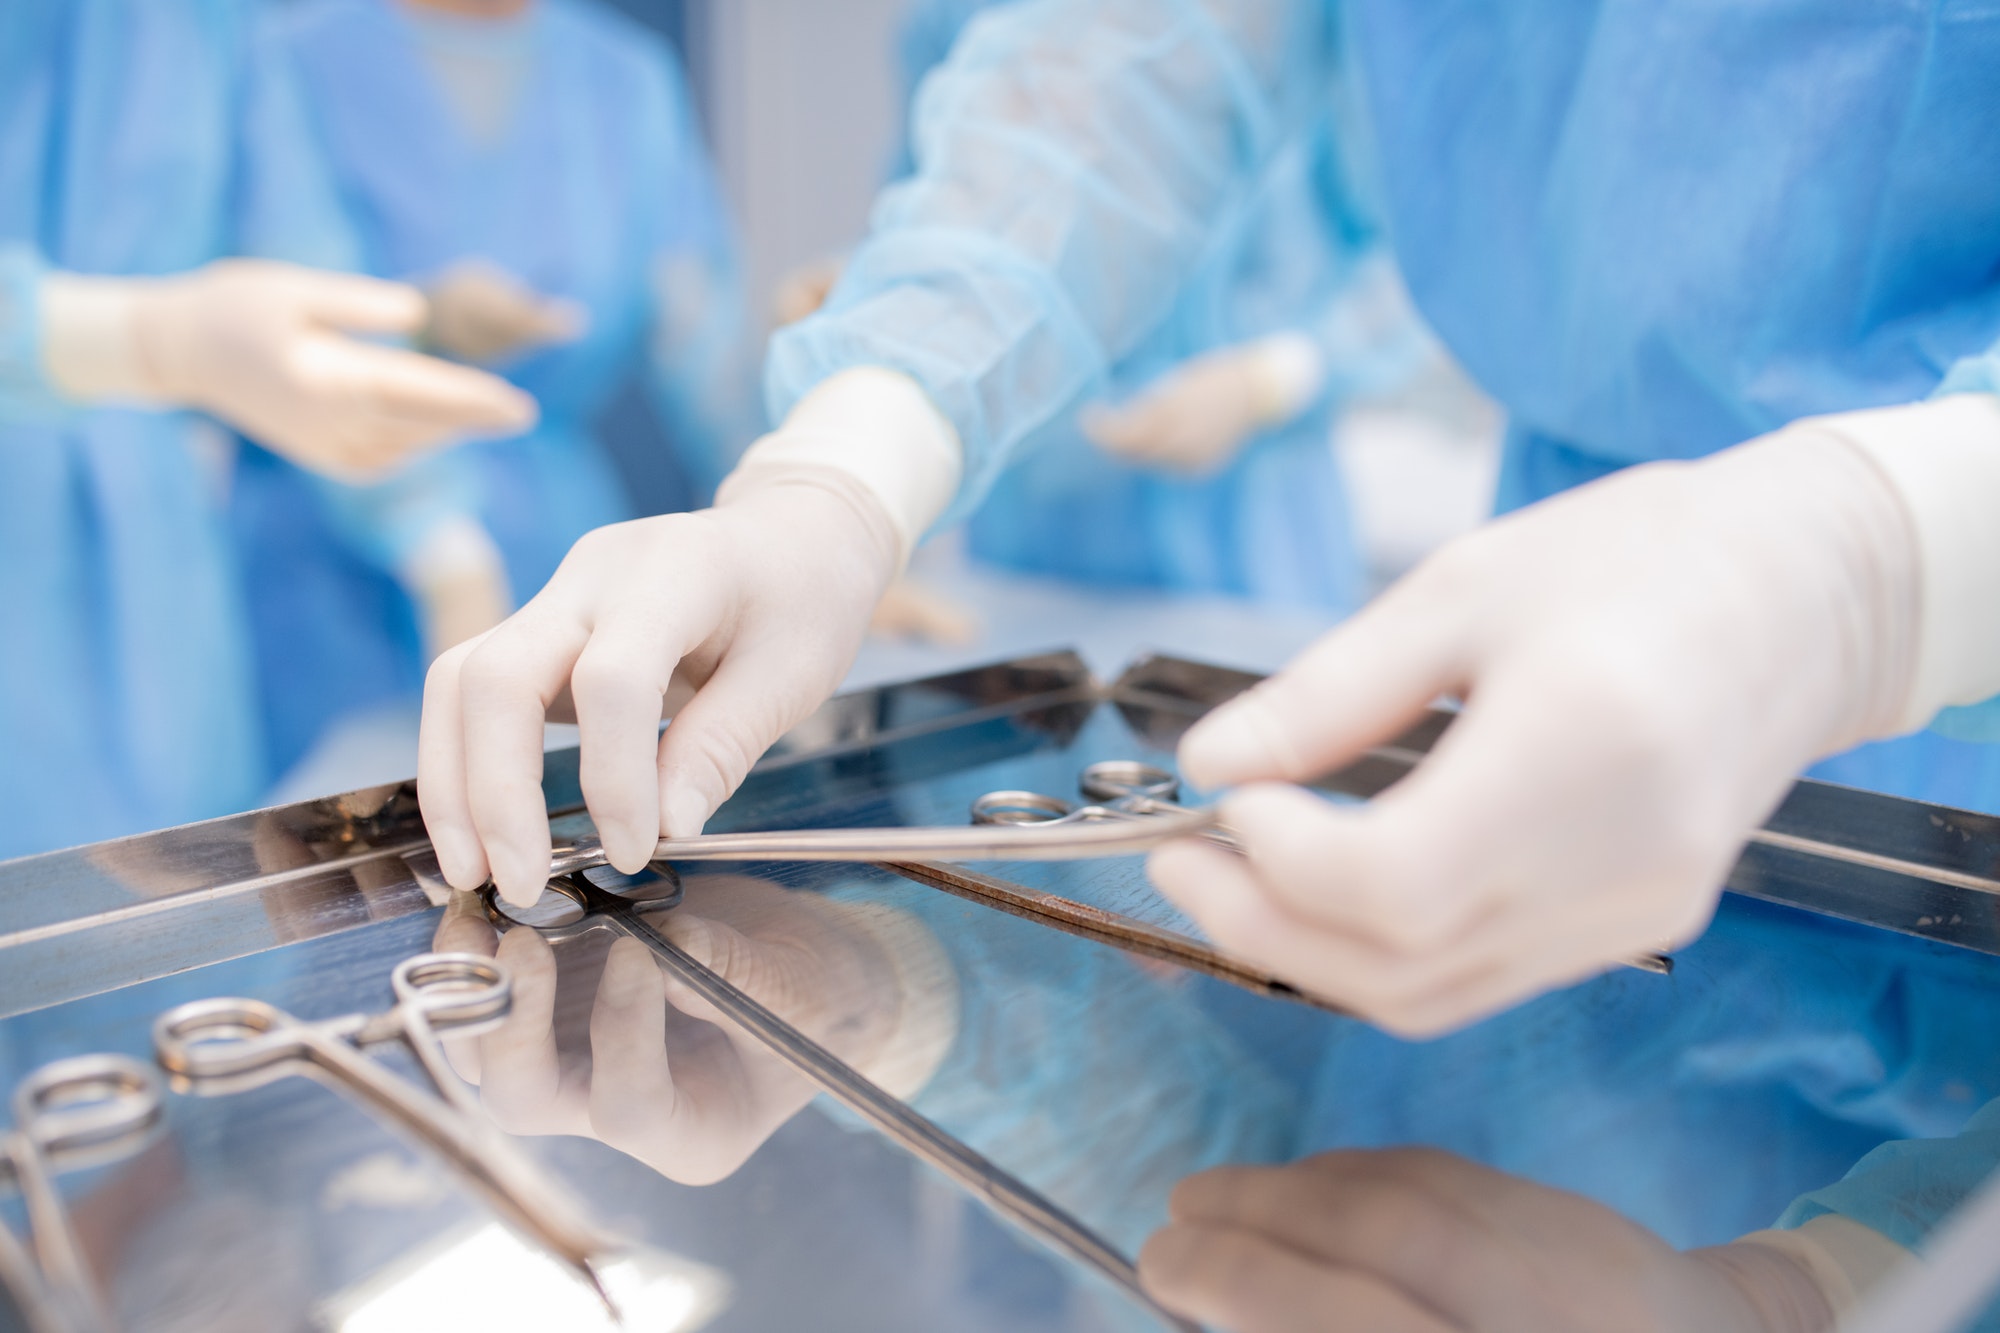 Gloved hands of surgeon or assistant taking one of sterile instruments